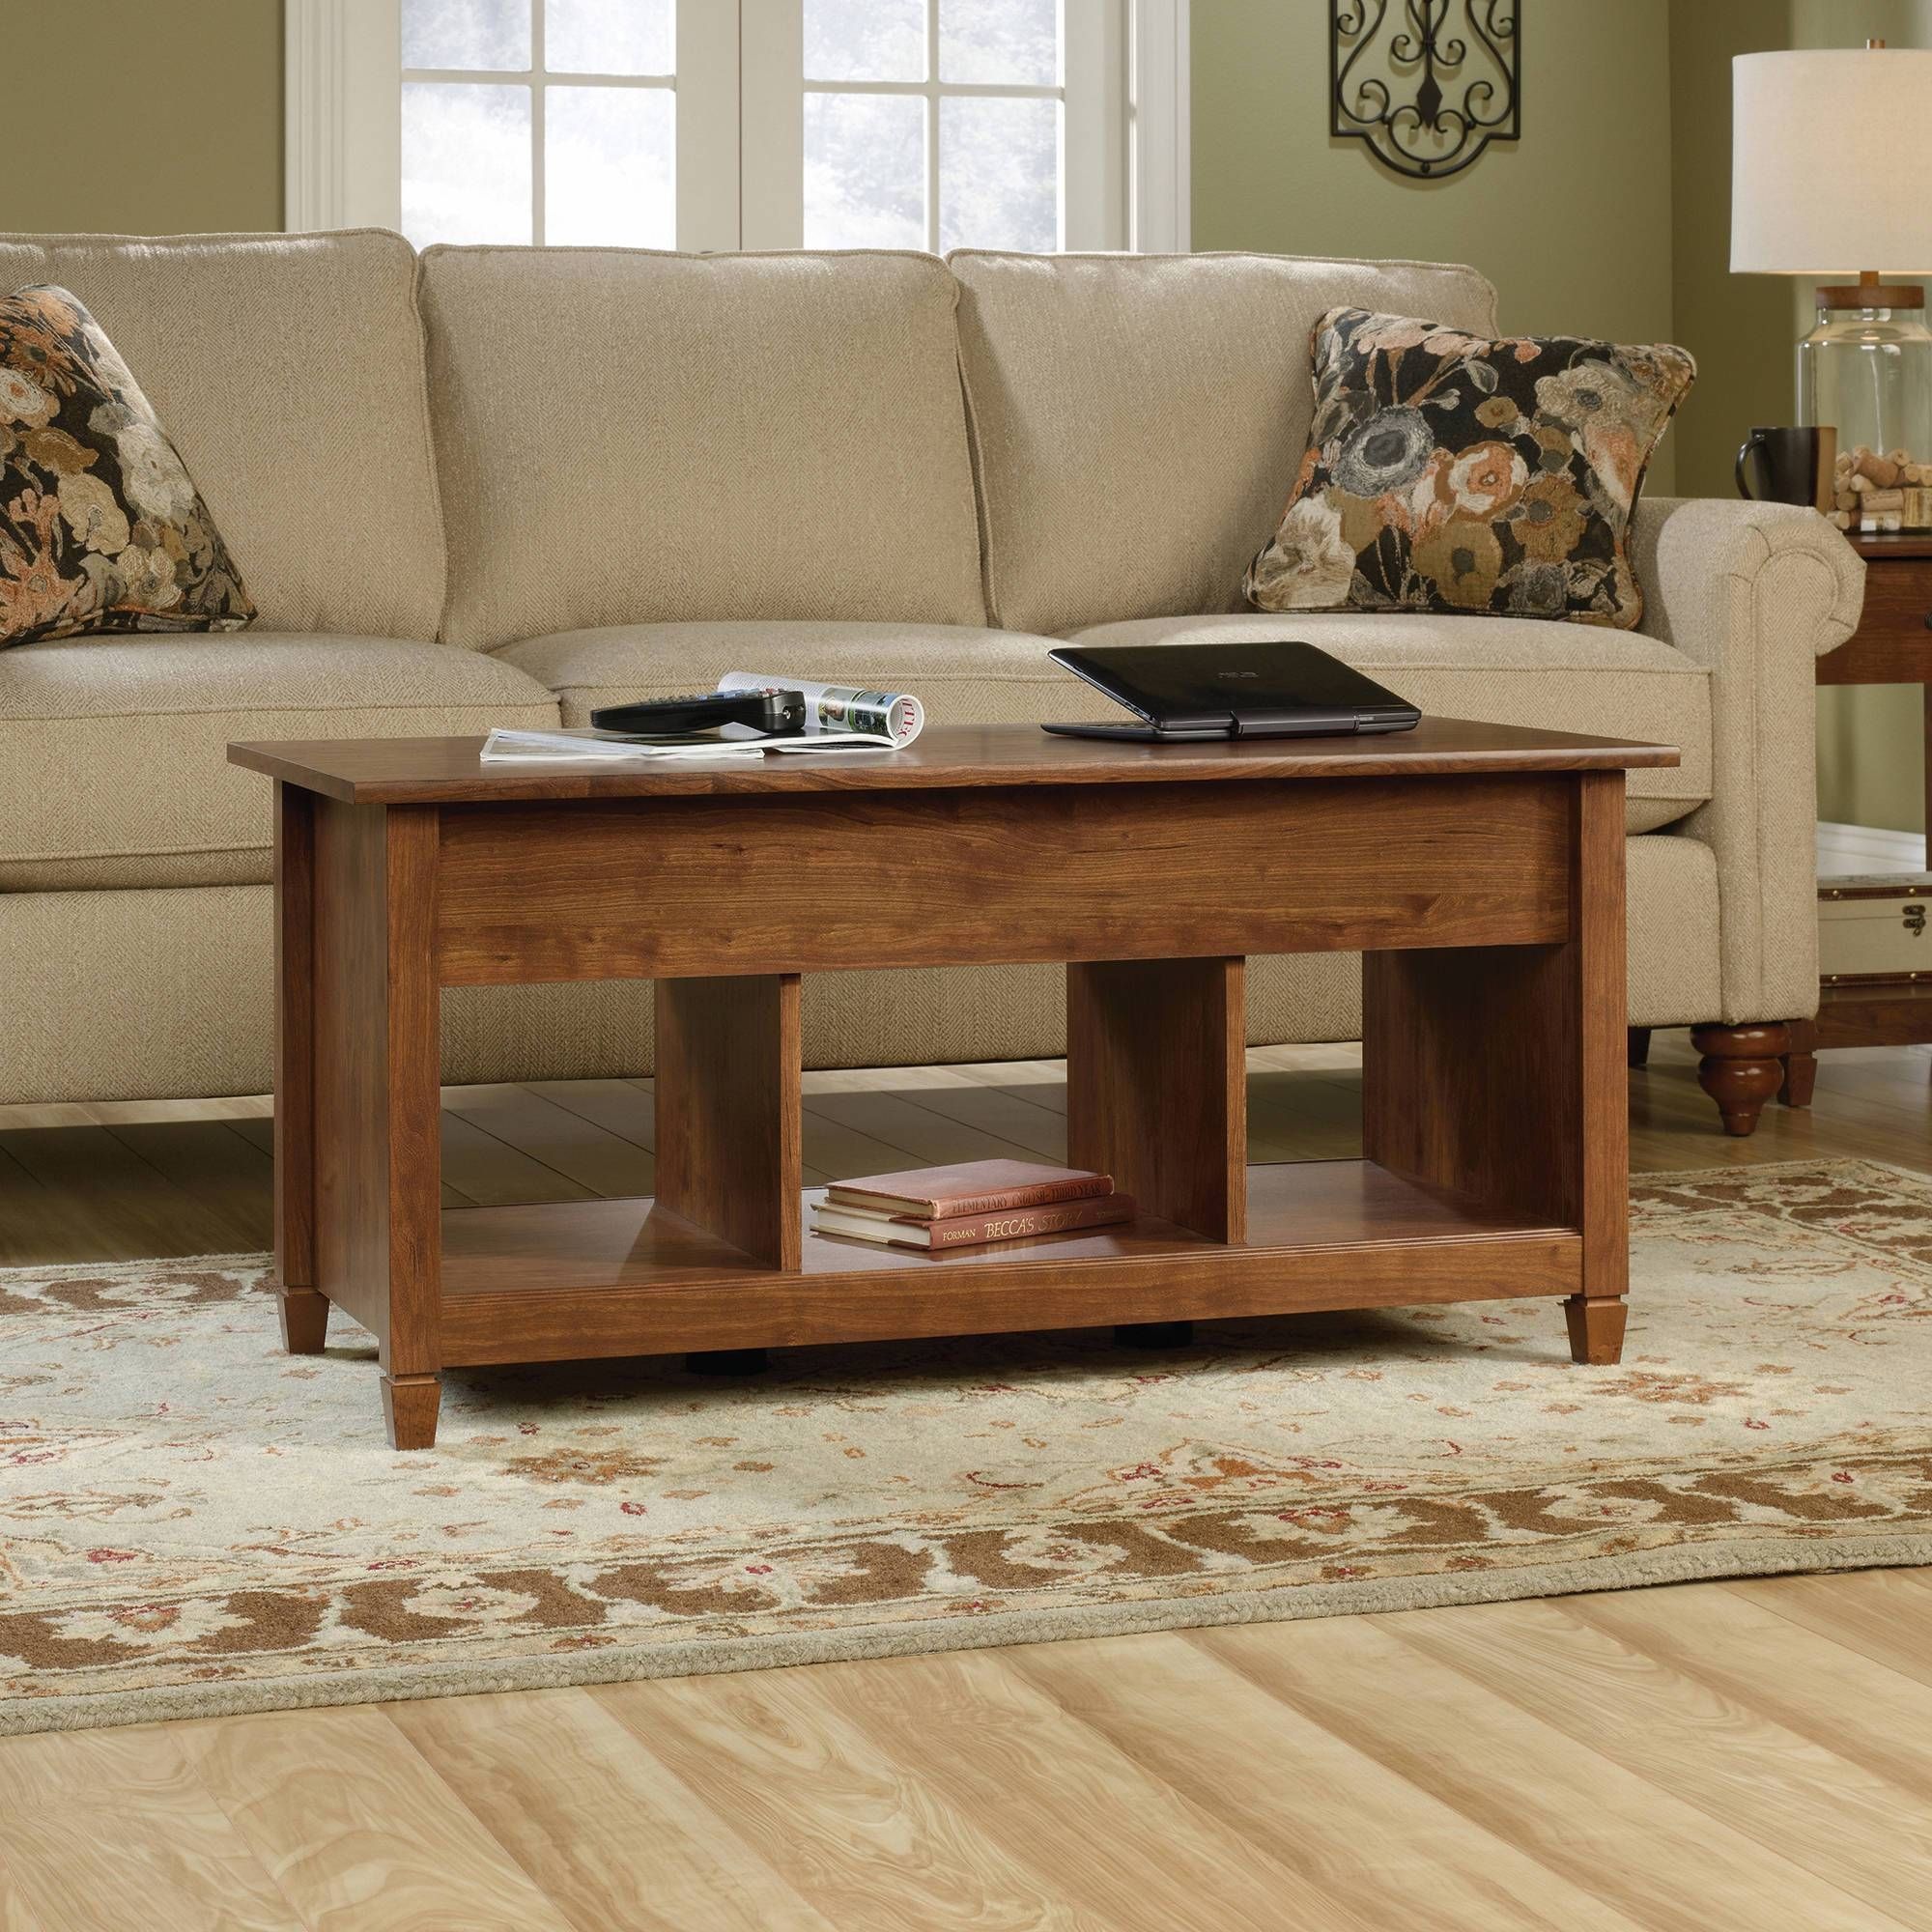 Sauder Harbor View Lift Top Coffee Table, Salt Oak Finish Intended For Lift Top Oak Coffee Tables (View 29 of 30)